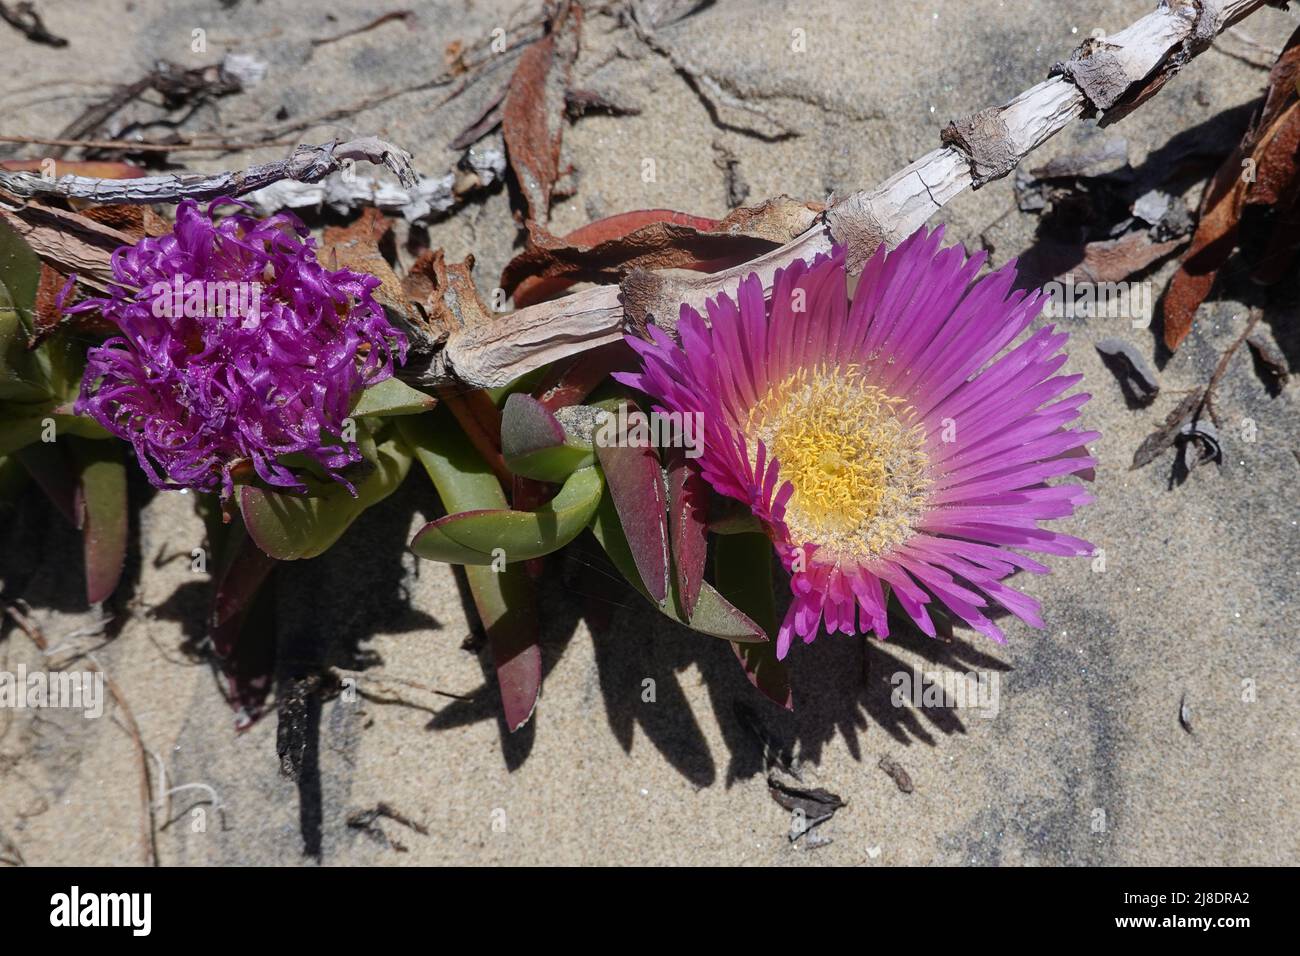 California invasive plant carpobrotus edulis also known as hottentot-fig, sour fig, ice plant or highway ice plant. Growing along central coast. Stock Photo